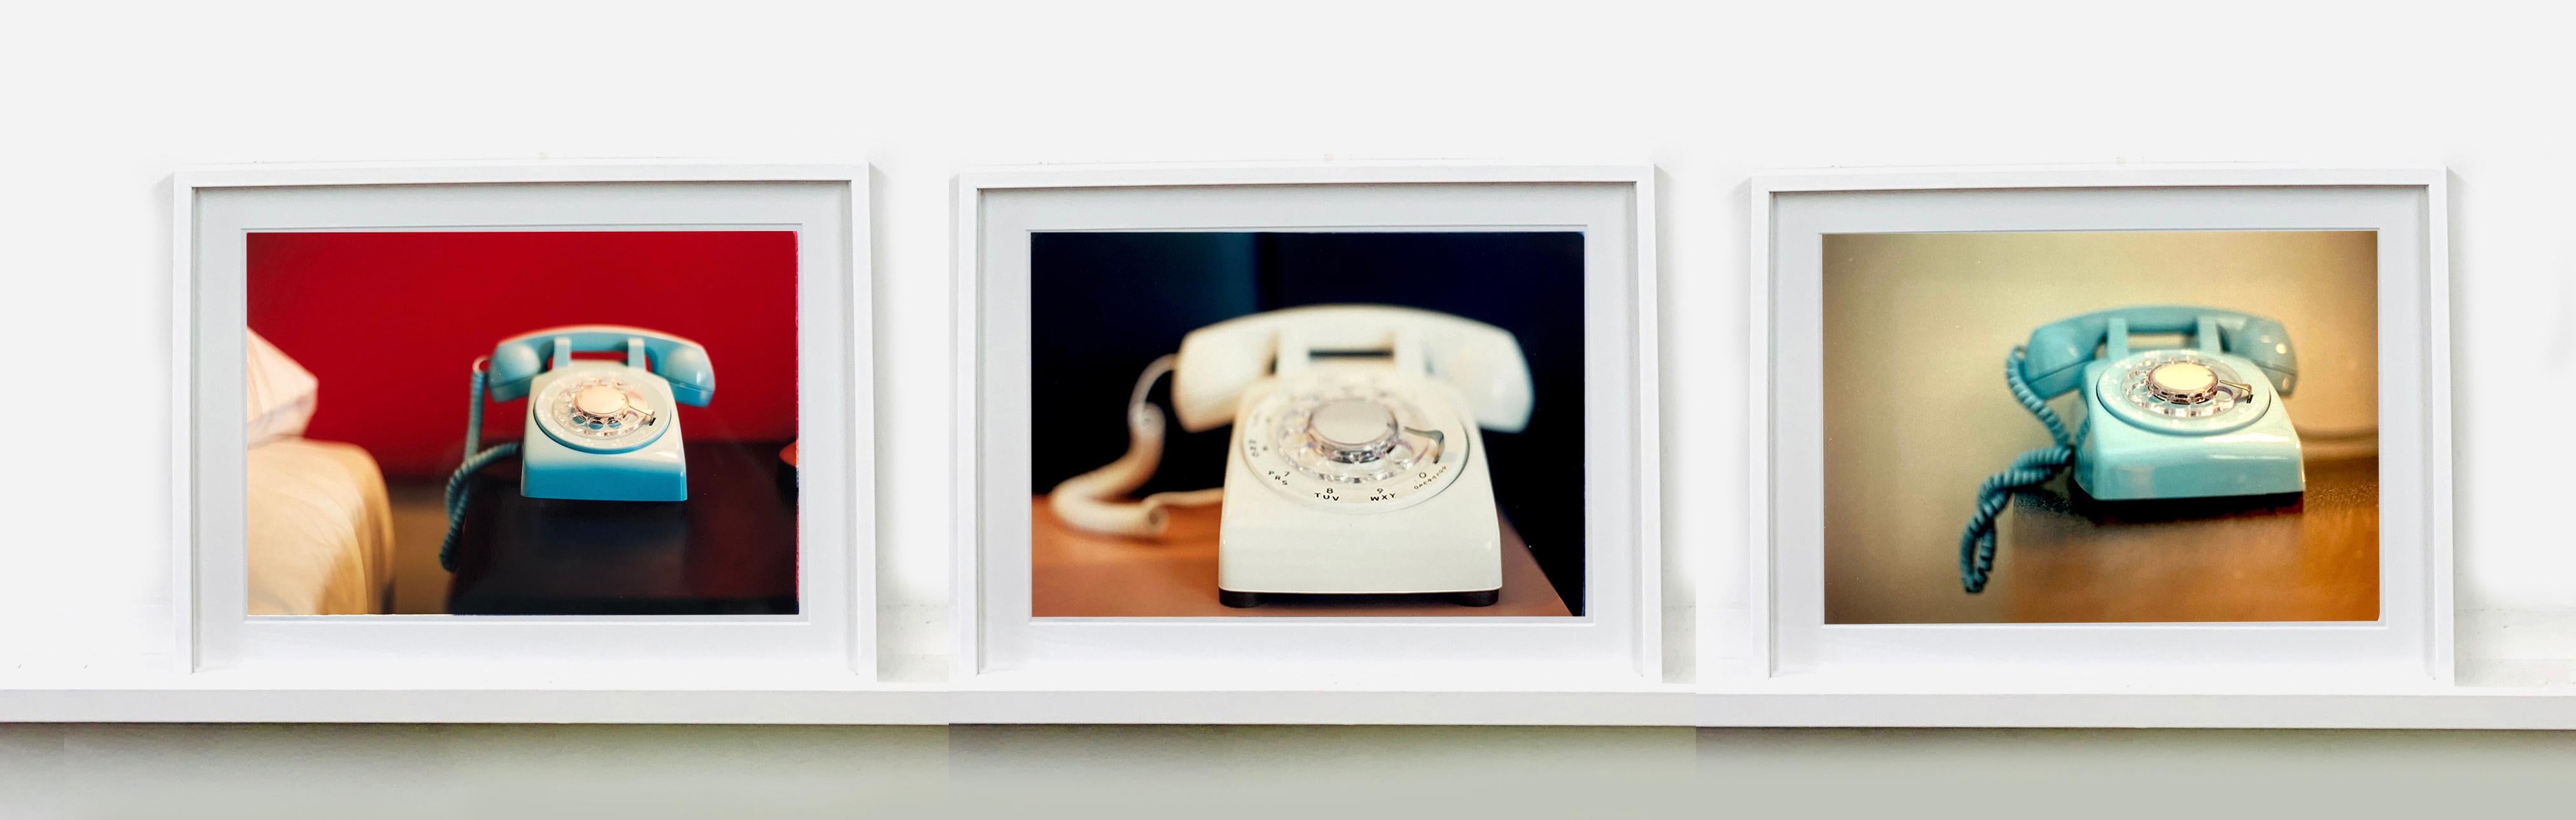 Telephone V, Ballantines Movie Colony, Palm Springs - Interior Color Photography For Sale 3